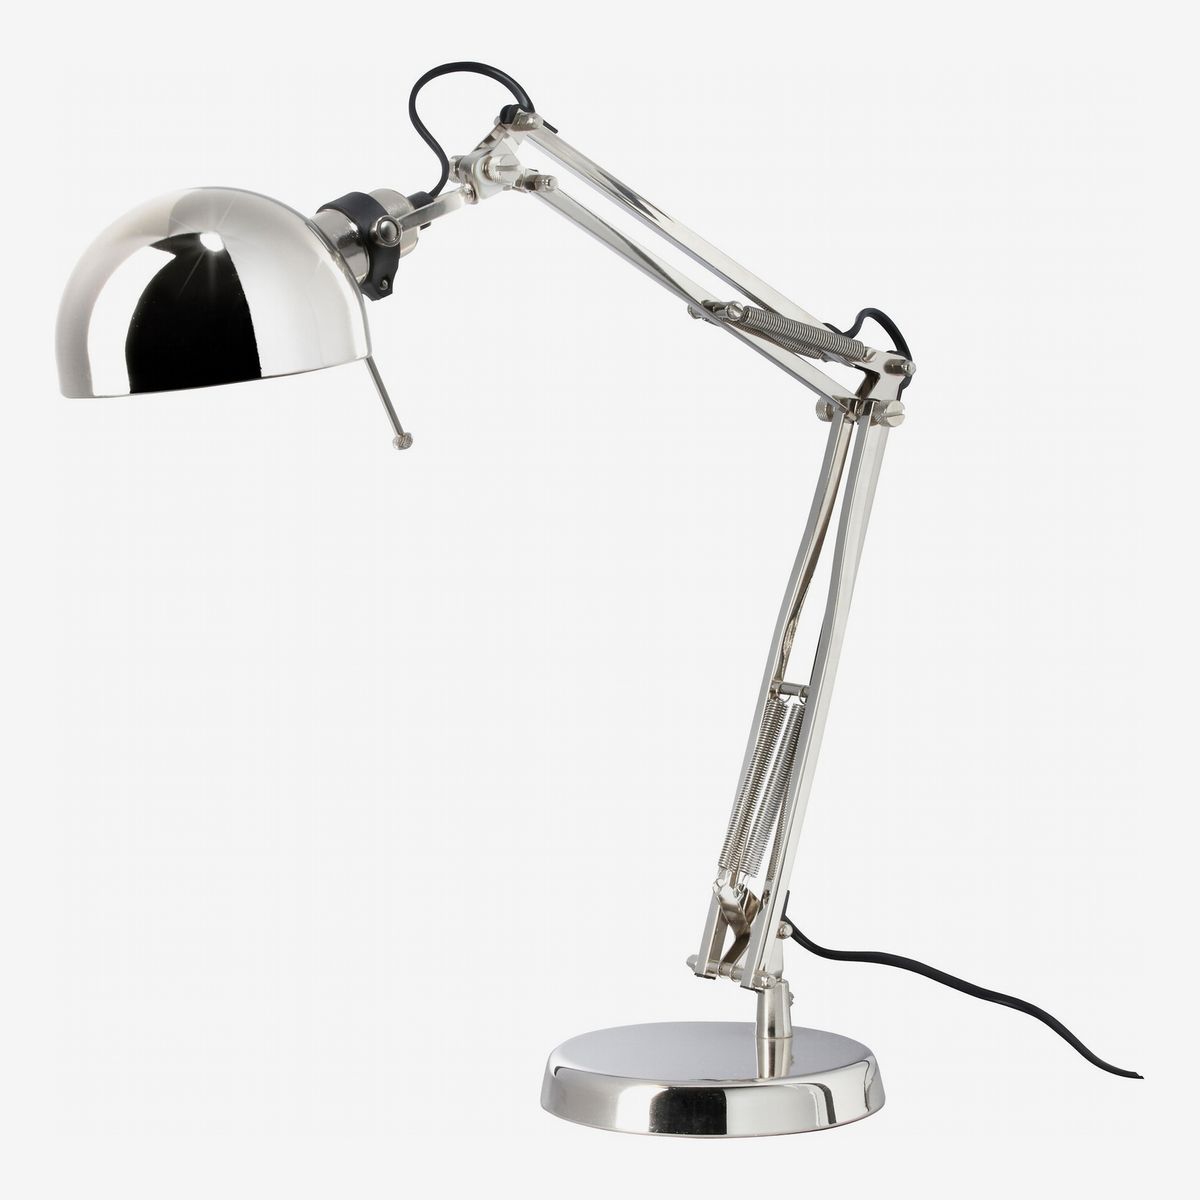 Chrome-plated lamp with cup-shaped shade.